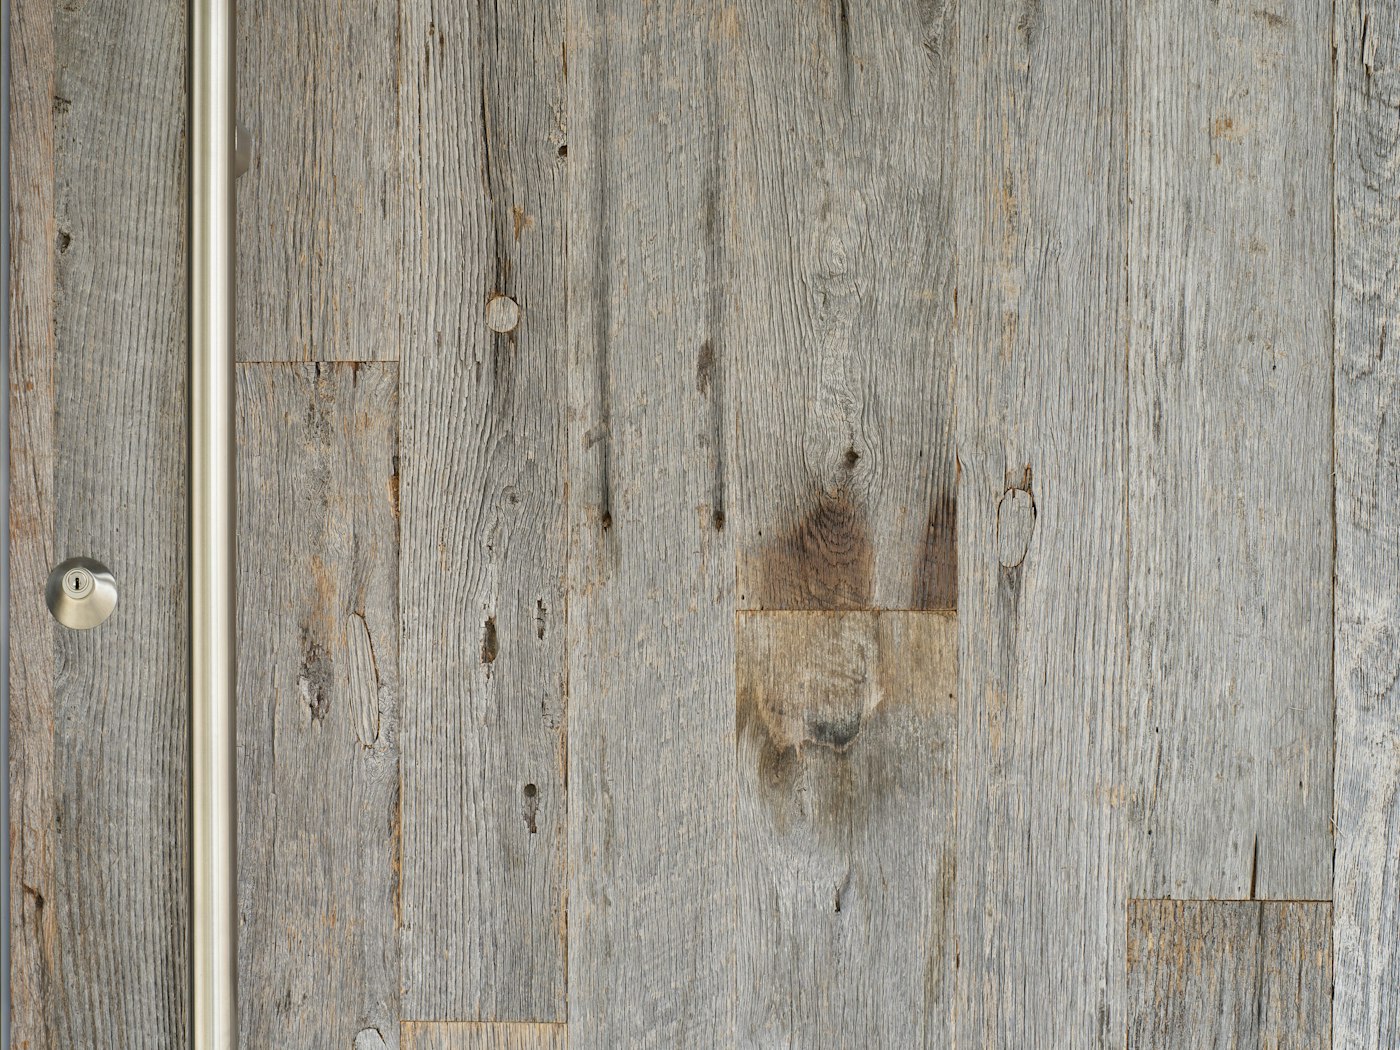 Each knot and grain tells a unique story in the rich and weathered textures of this stunning design